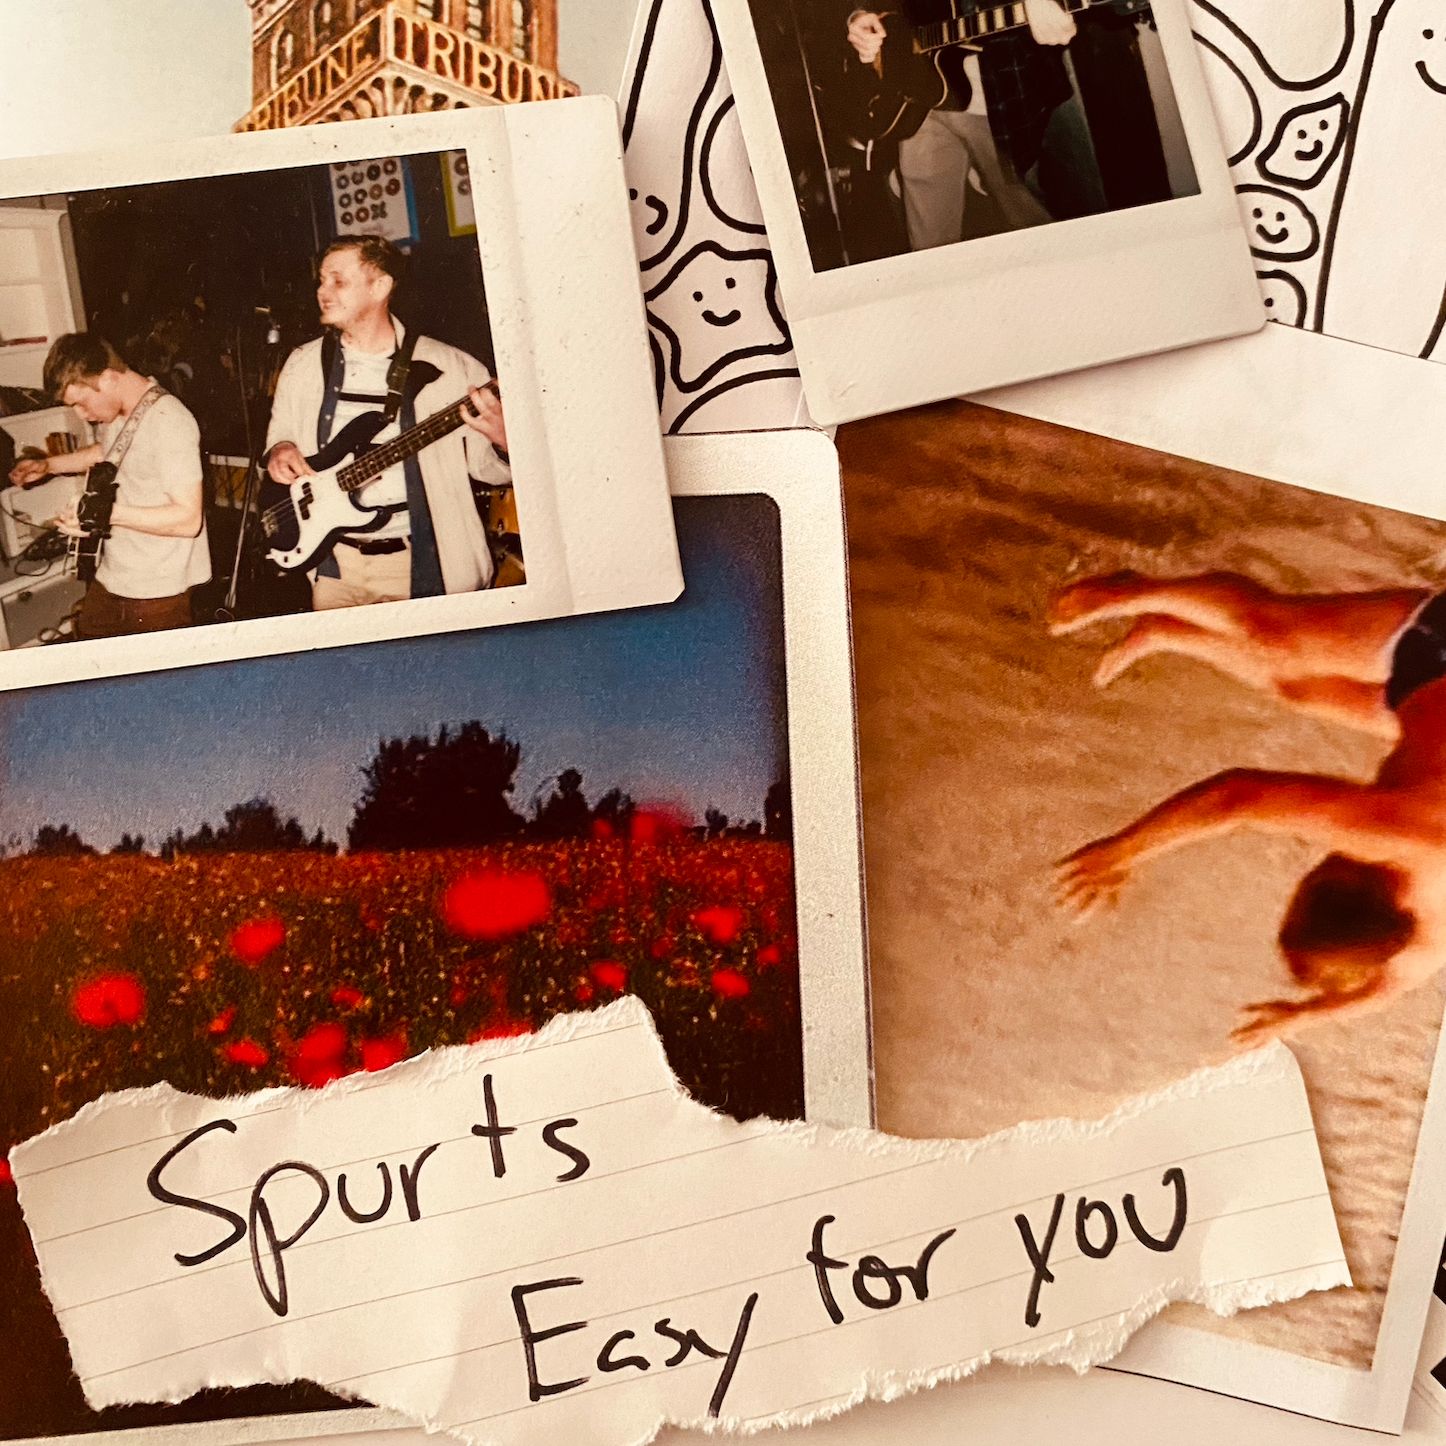 Single: Spurts – Easy For You